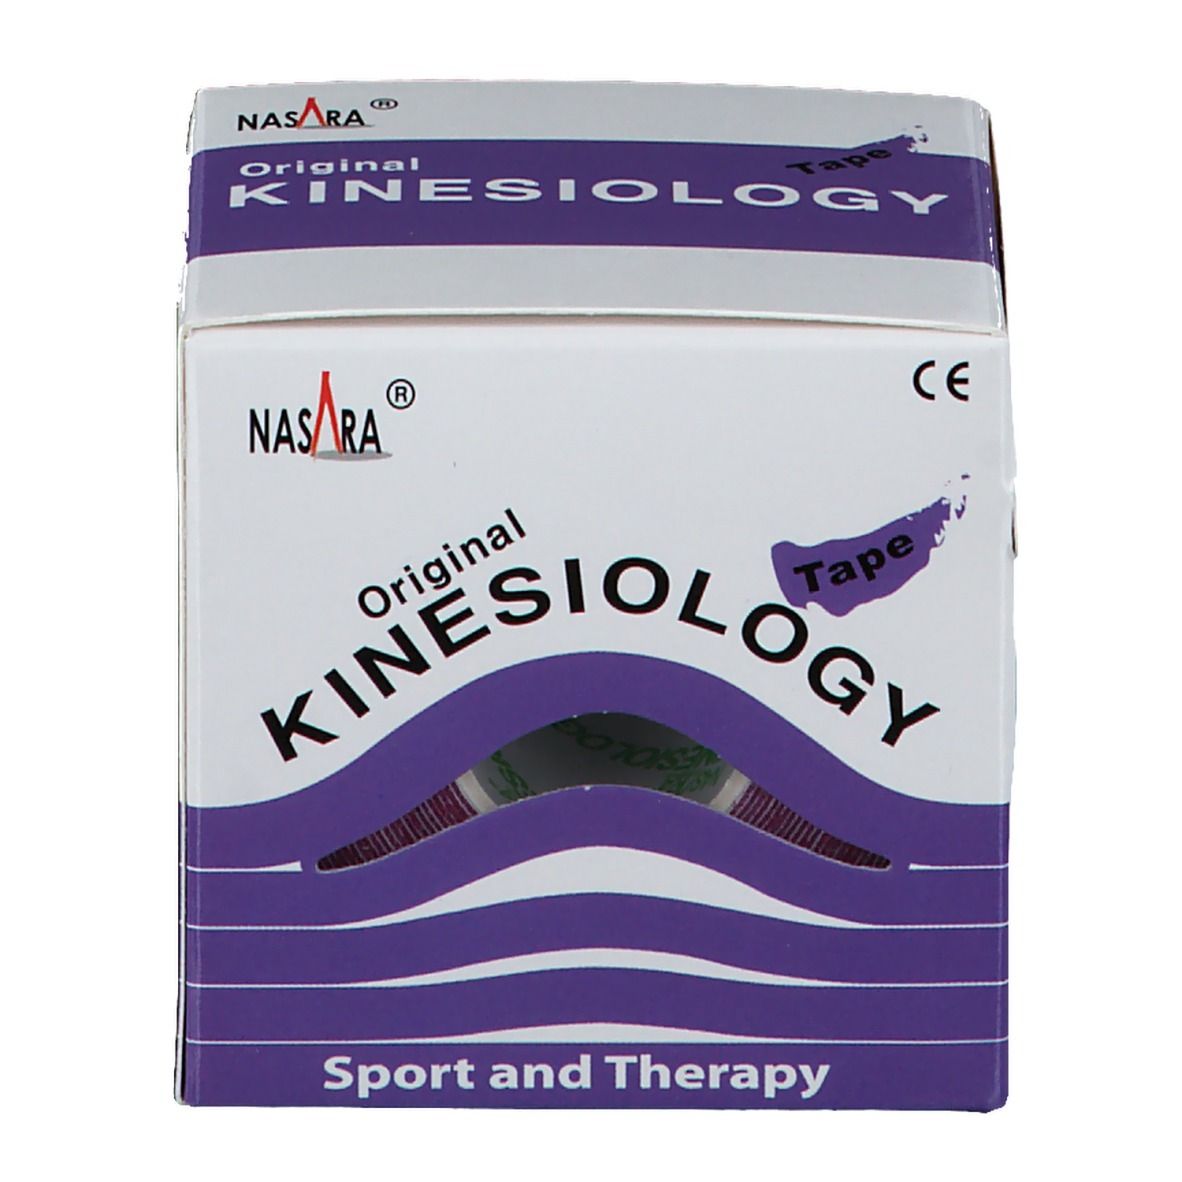 NASARA® Kinesiology-Tape classic 5 cm x 5 m Rolle Lavendel